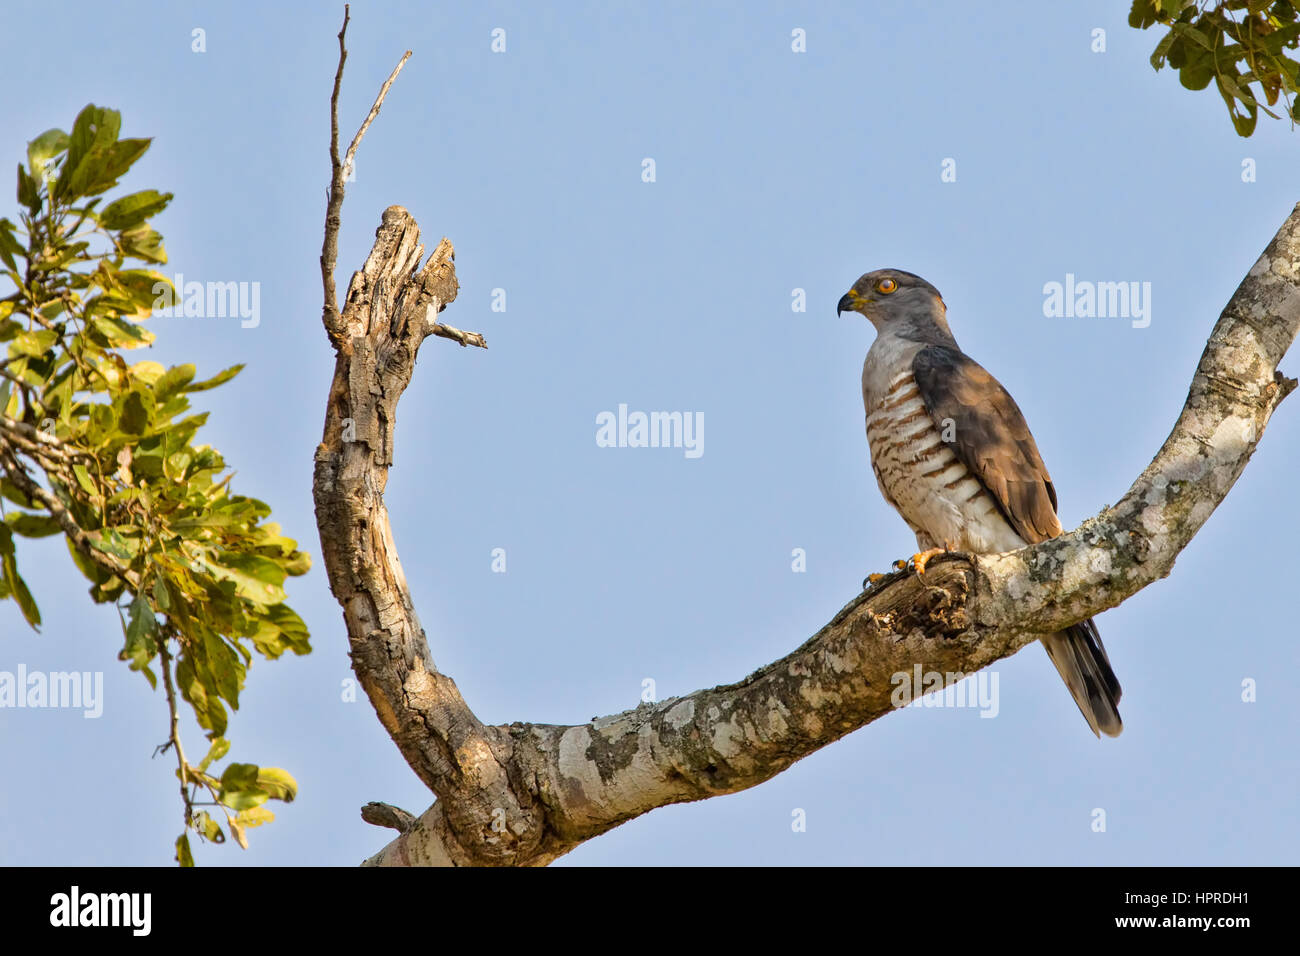 African cuckoo-hawk, Aviceda cuculoides, is a rare and exciting sighting for birders in Kruger National Park, South Africa. Stock Photo